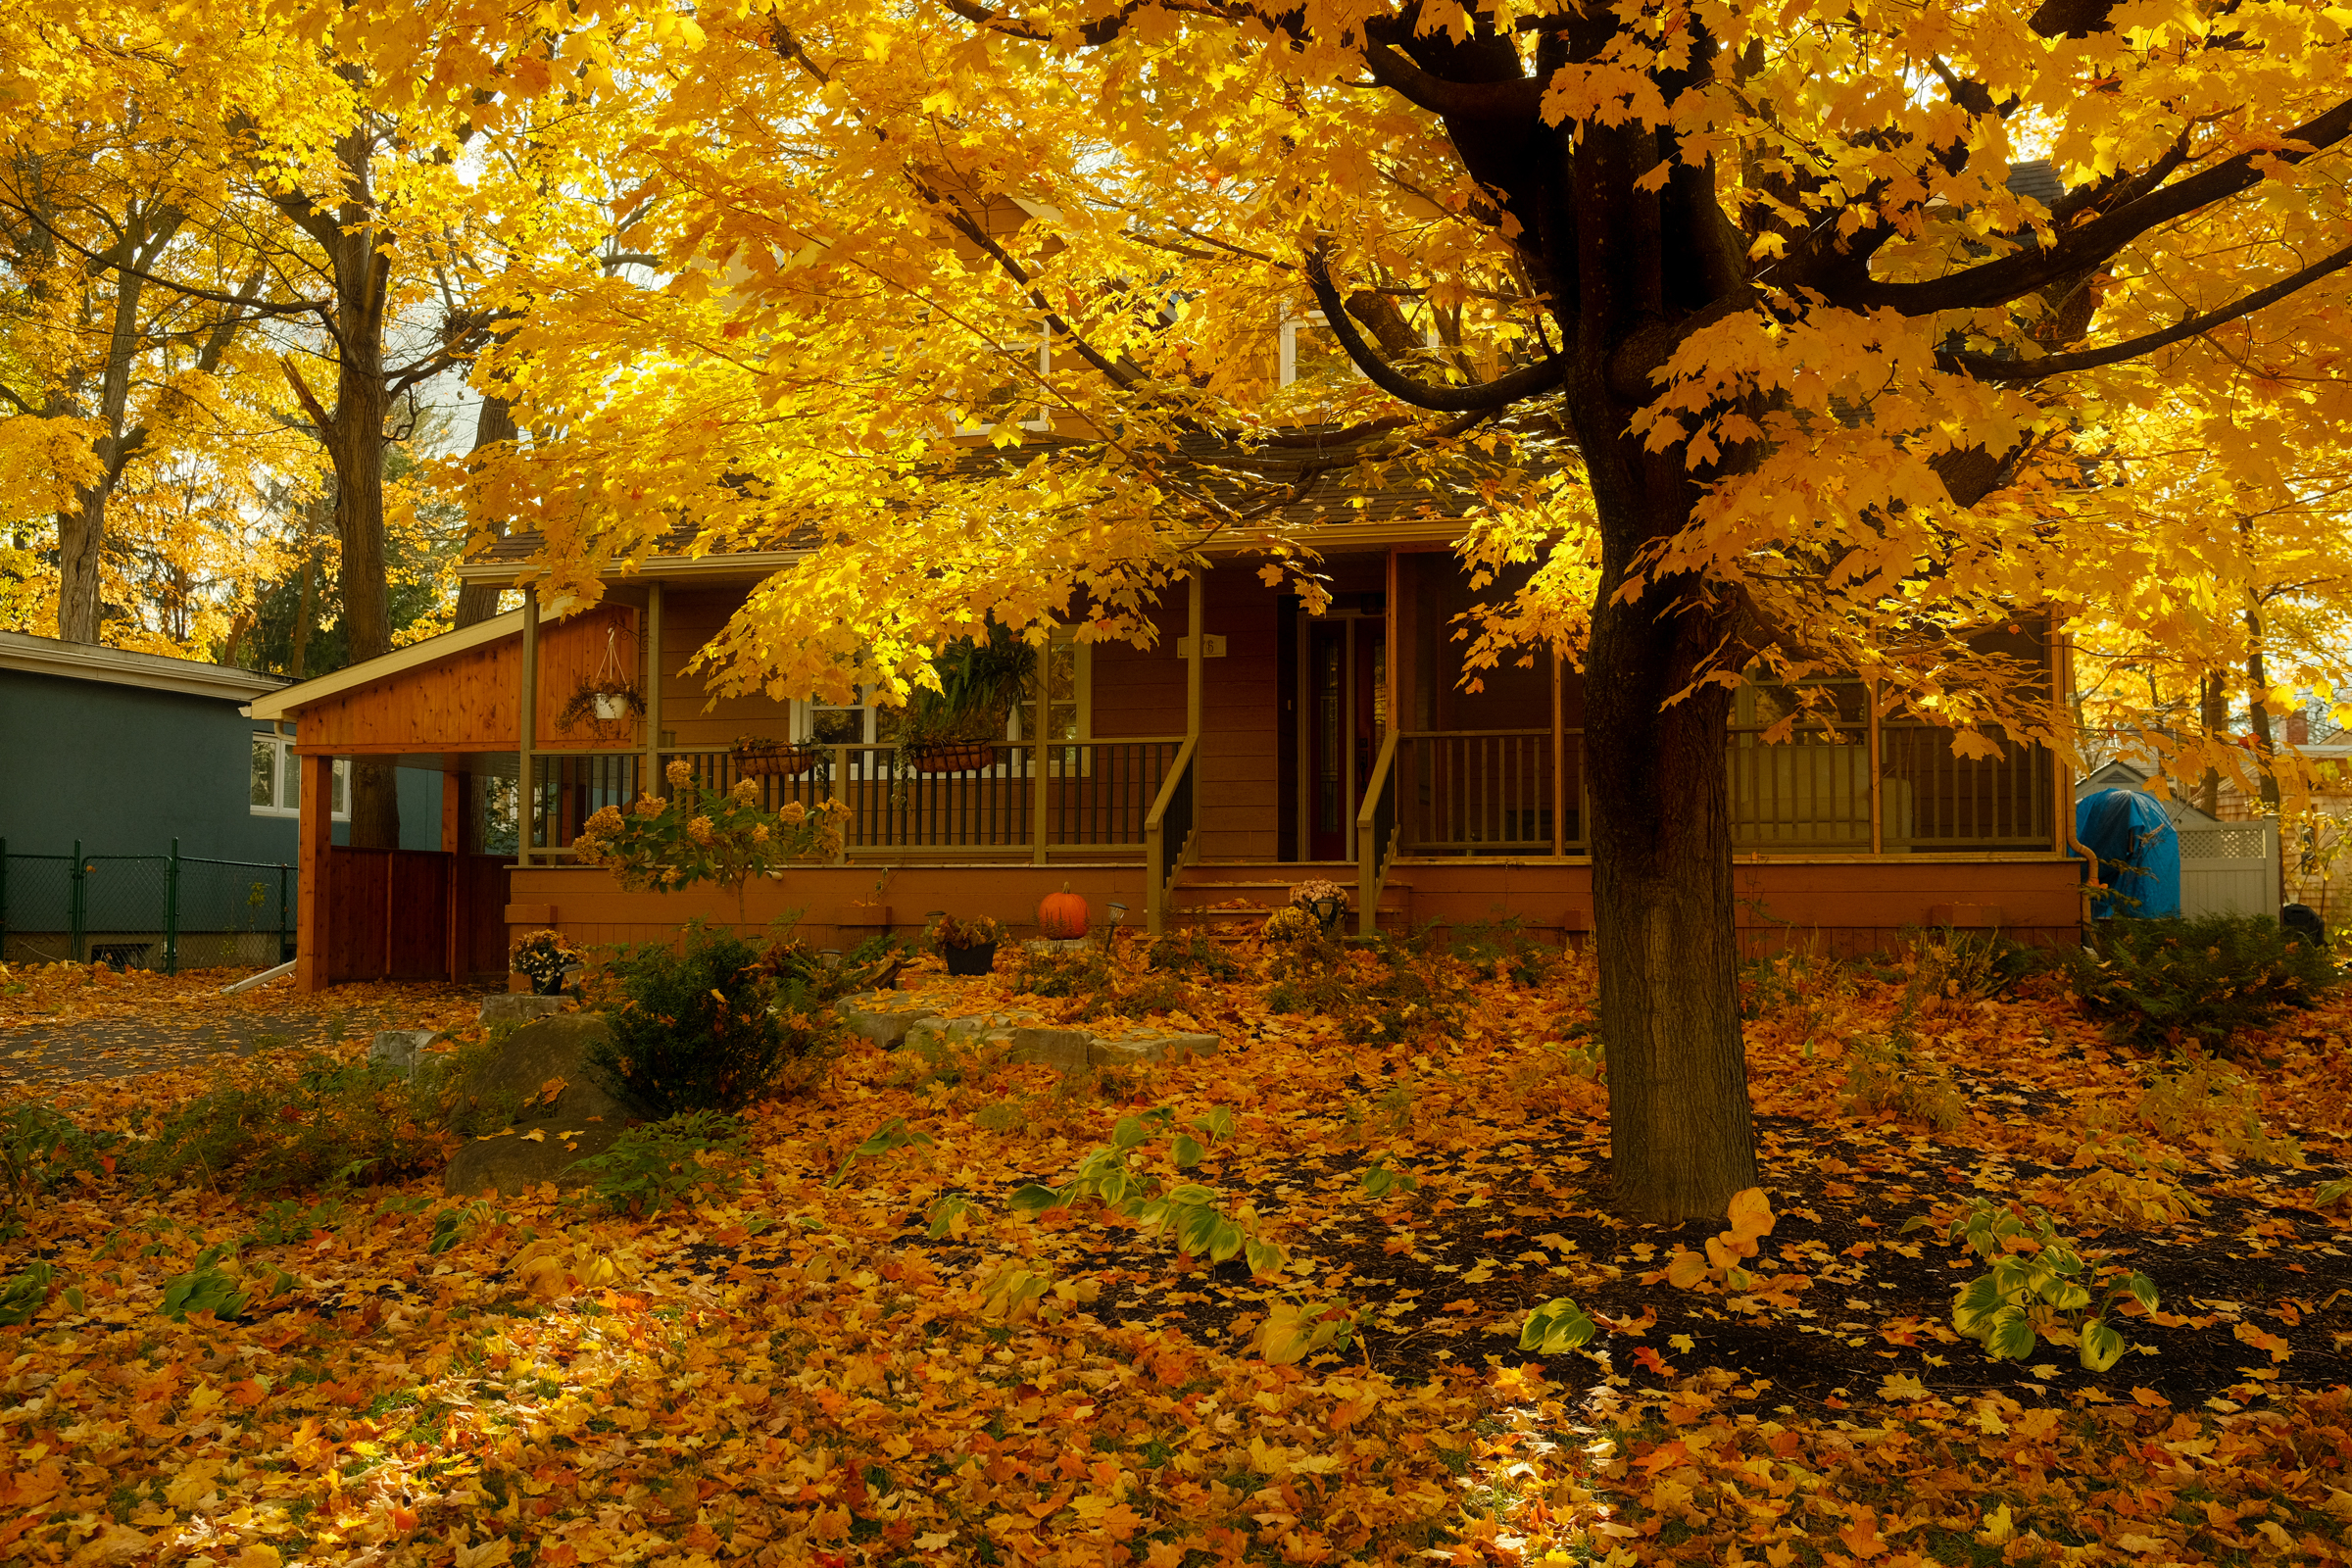 Photo of a house and yard covered in yellow fall leaves